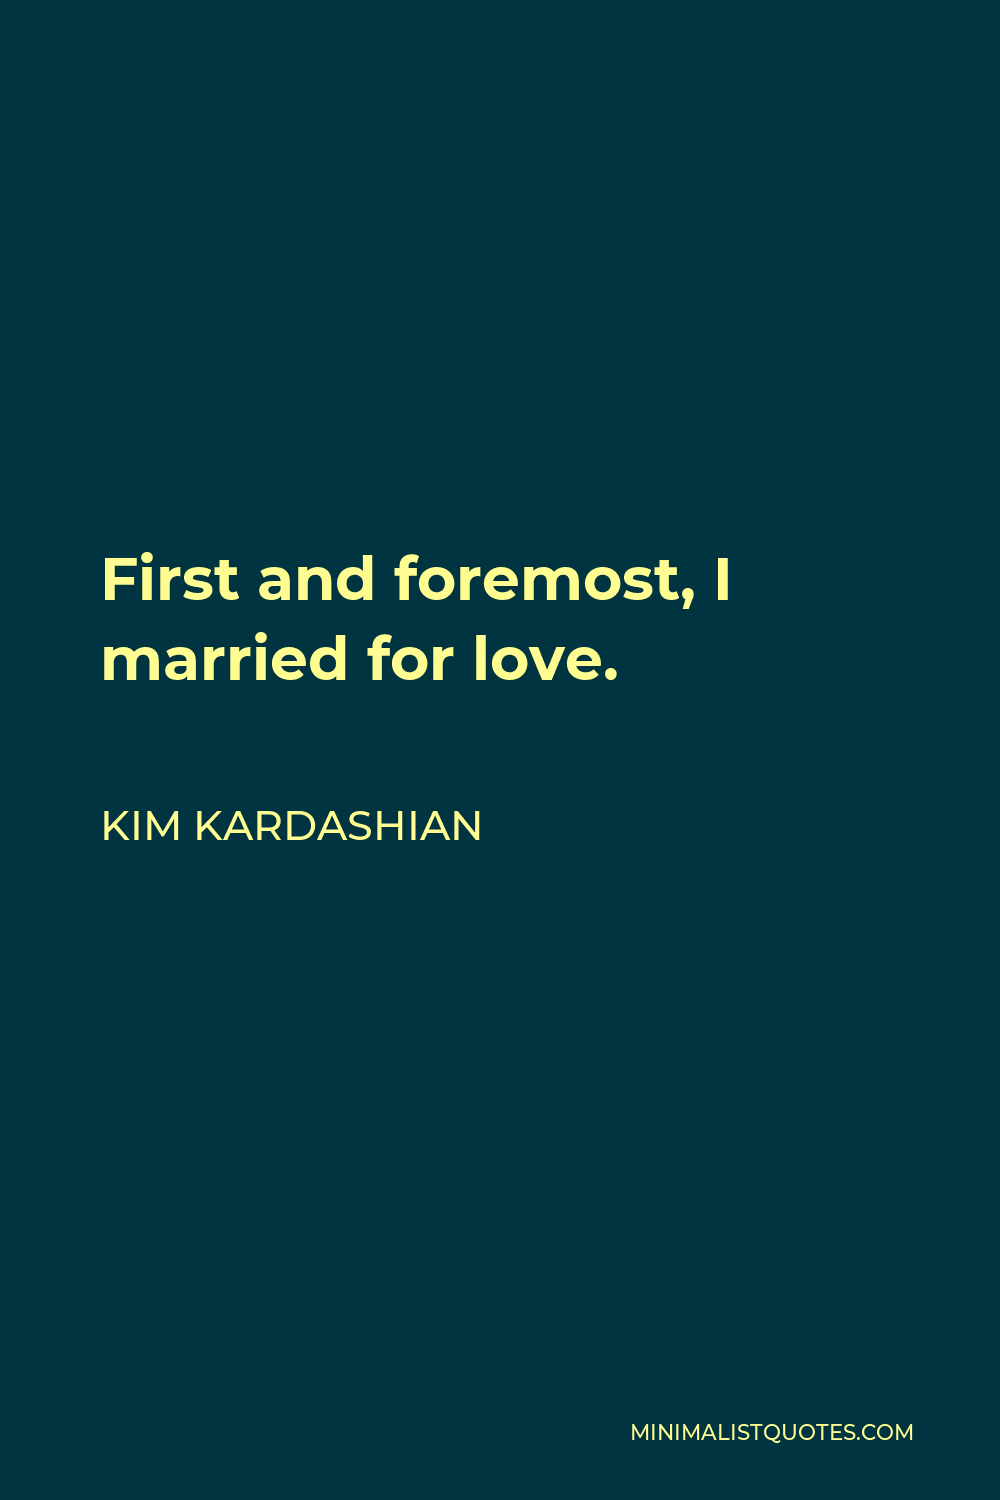 Kim Kardashian Quote - First and foremost, I married for love.